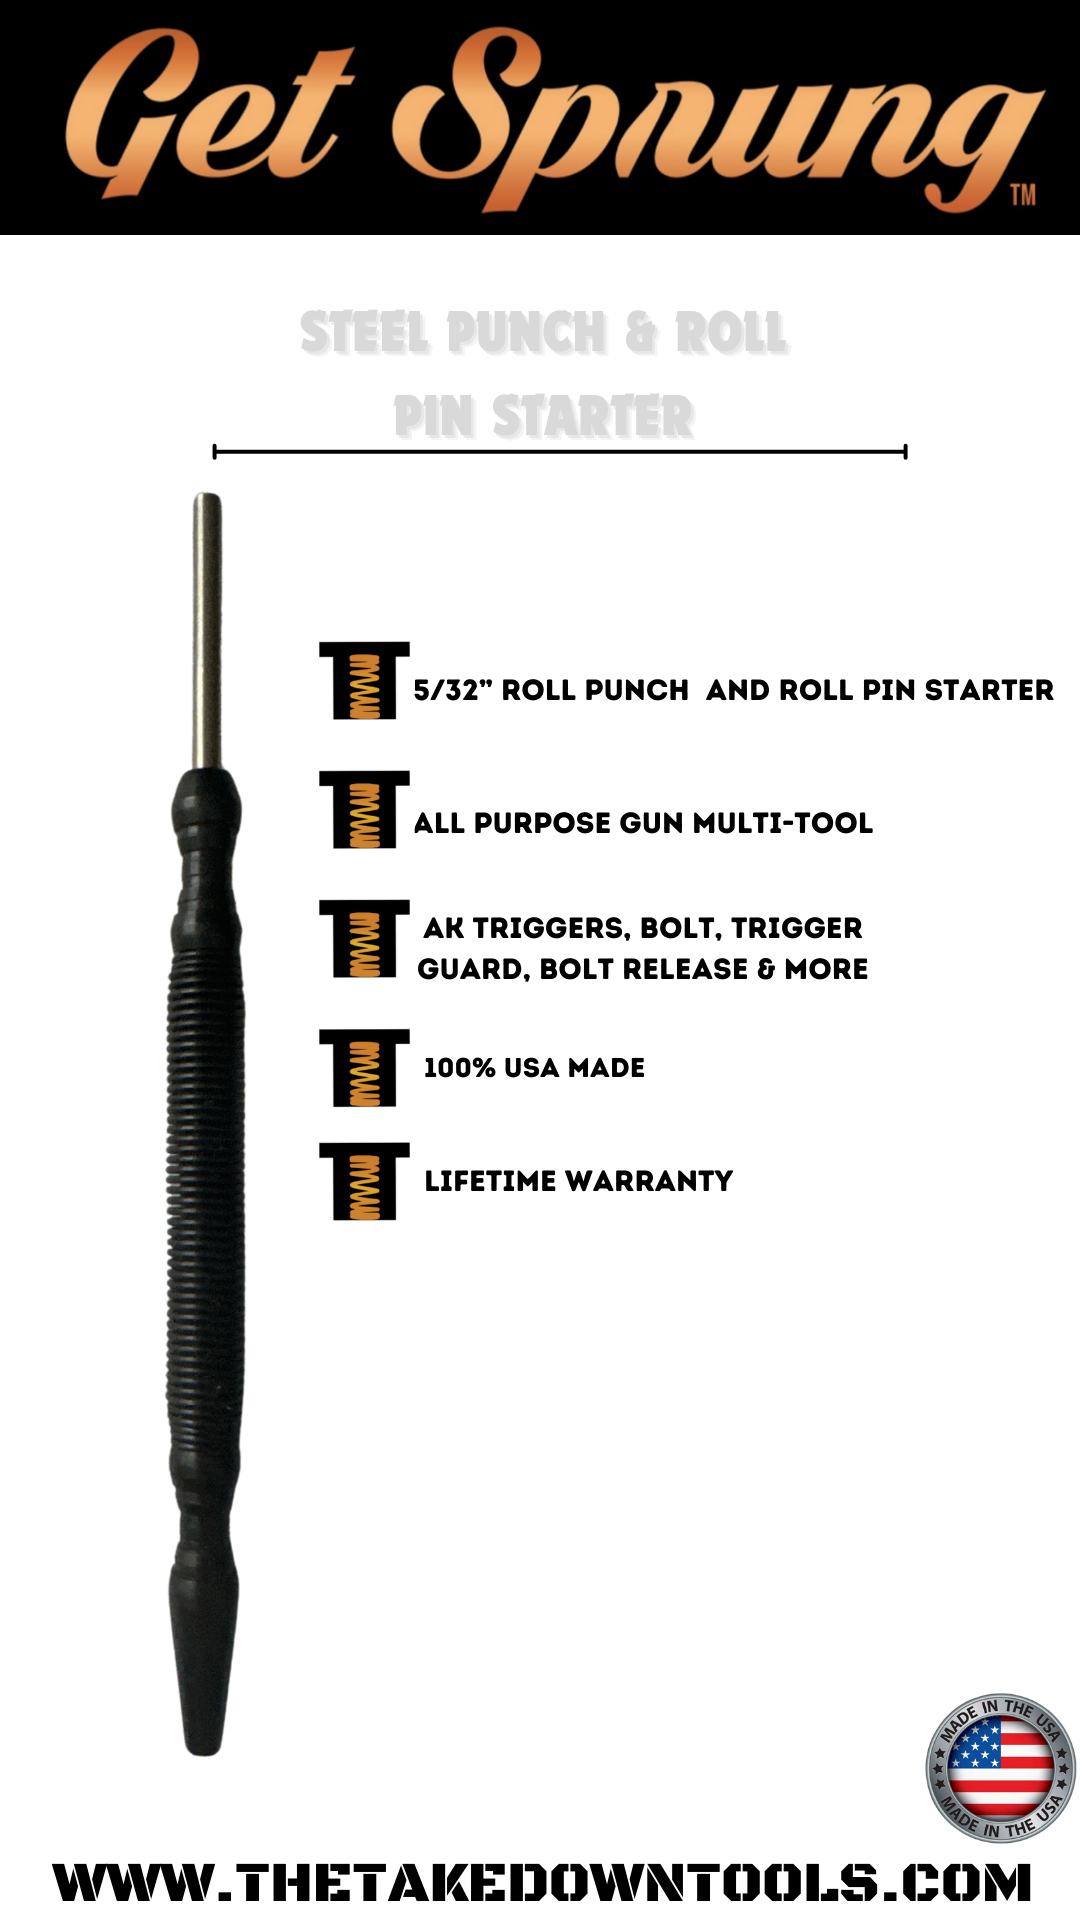 The Steel Punch & Roll Pin Starter